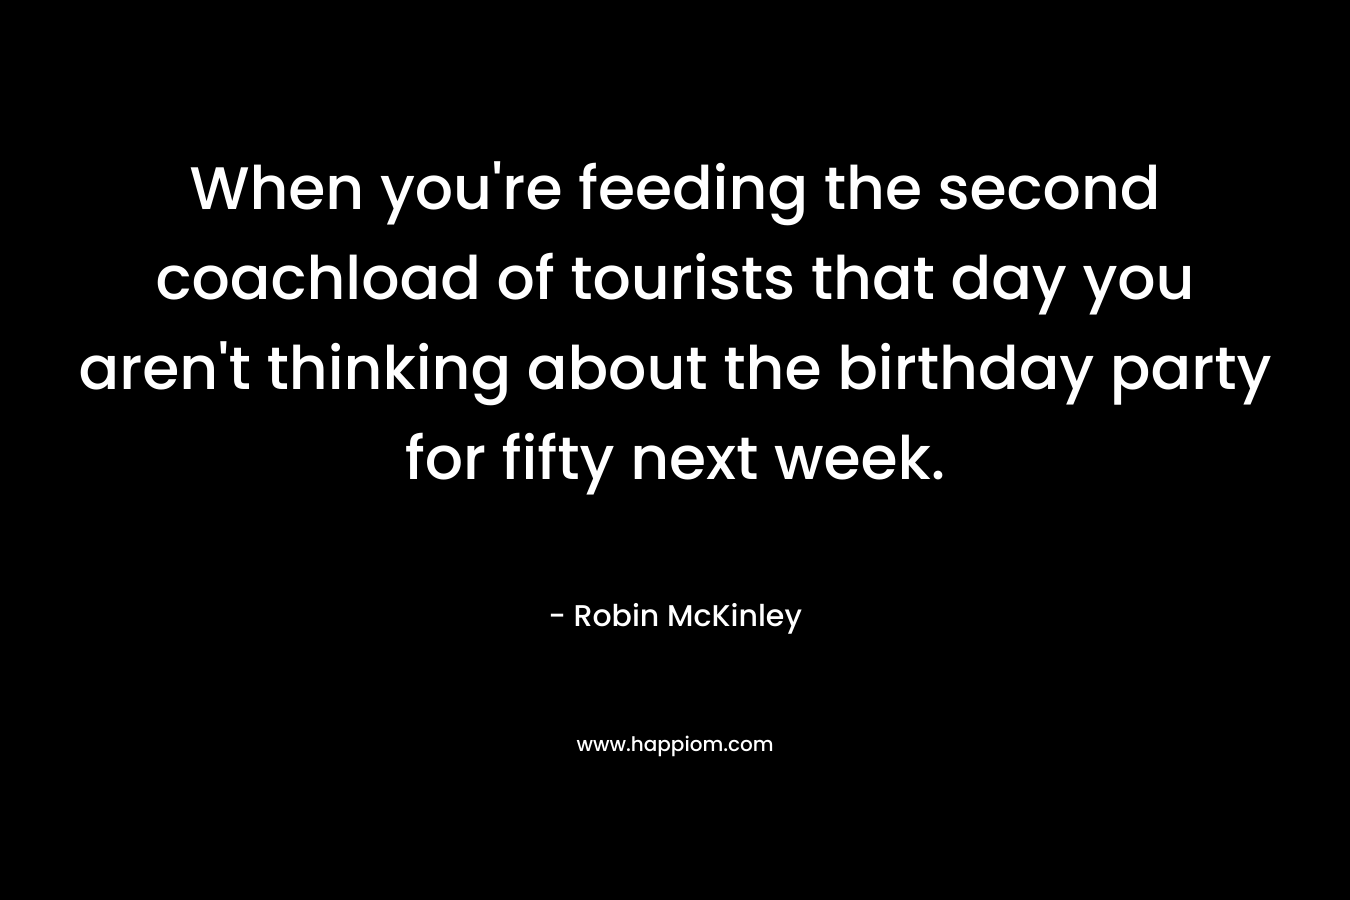 When you’re feeding the second coachload of tourists that day you aren’t thinking about the birthday party for fifty next week. – Robin McKinley